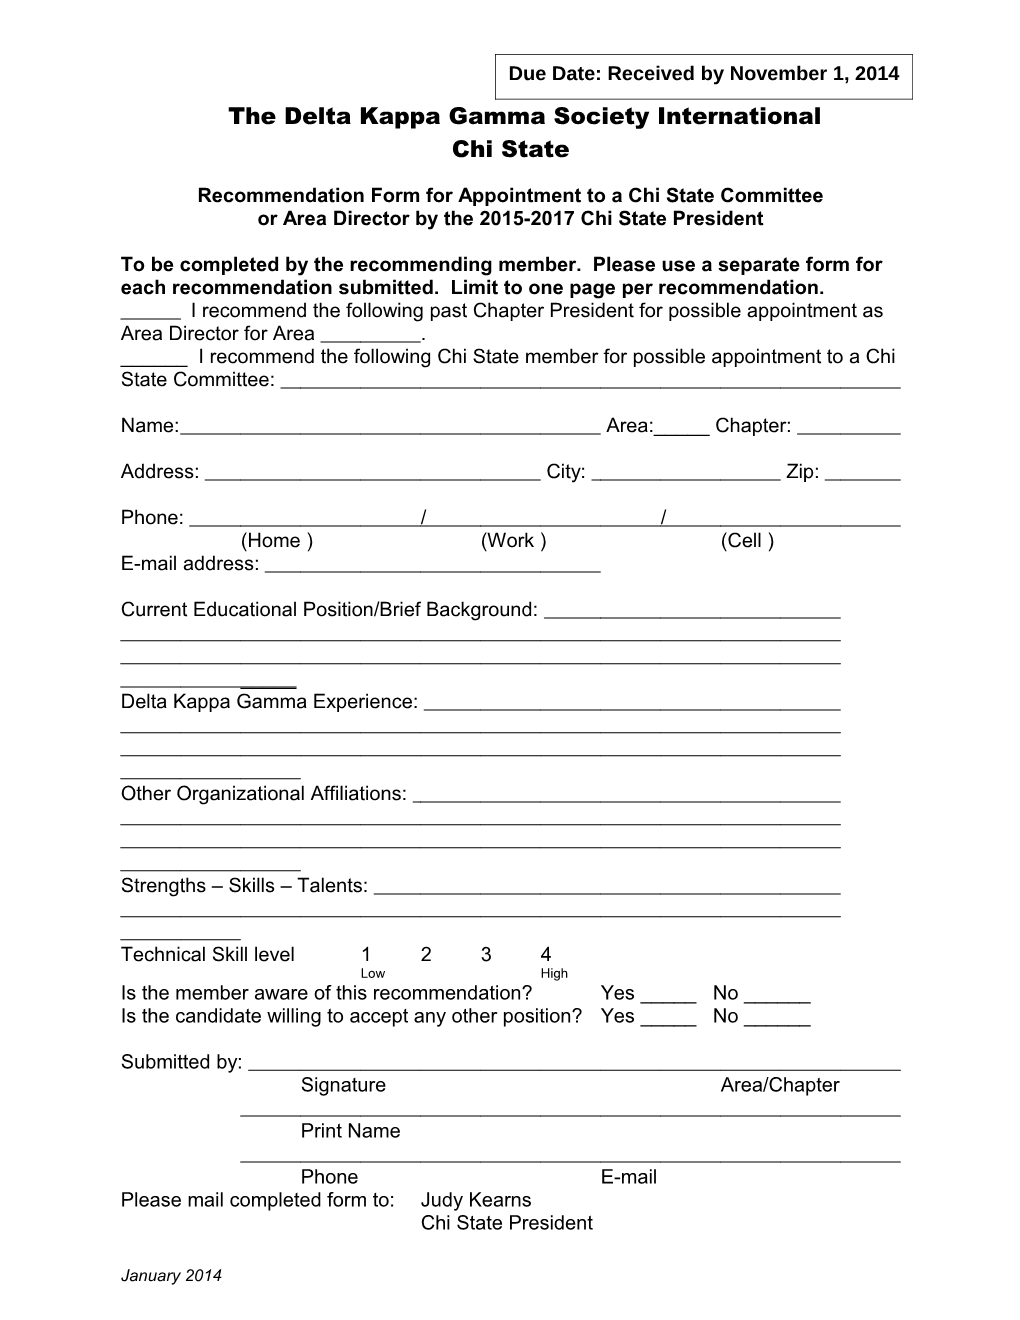 Recommendation Form for Appointment to a Chi State Committee